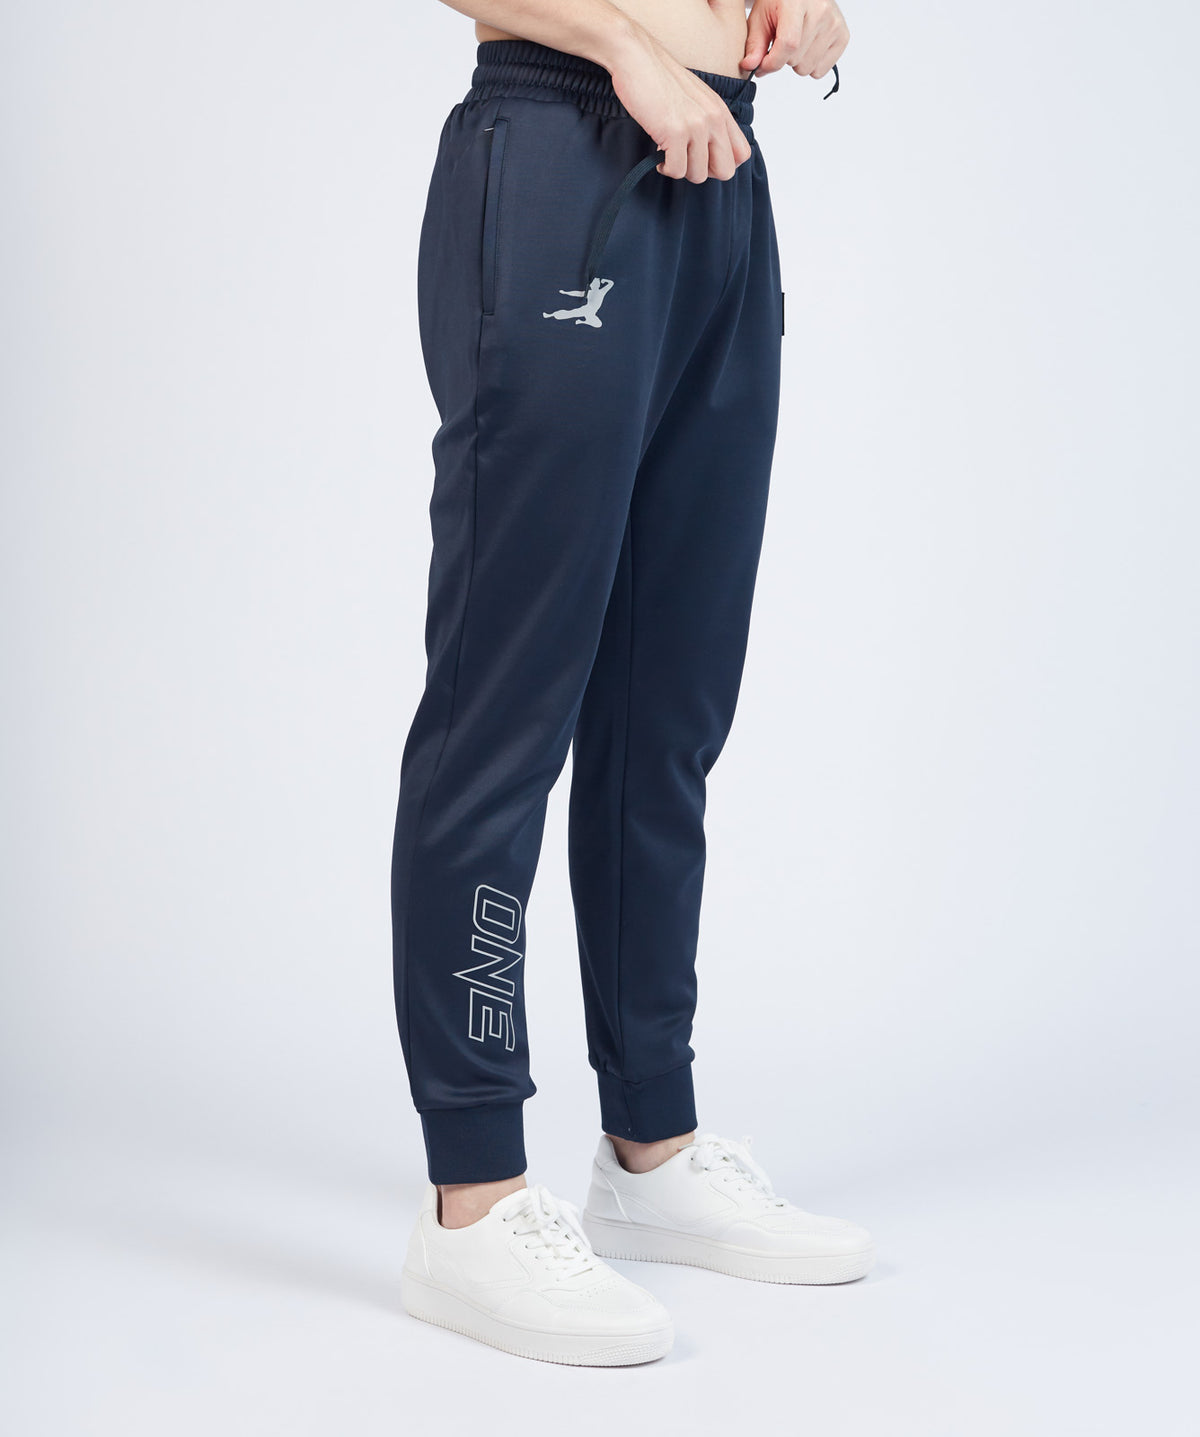 Buy PUMA Women's Track Pants (58008301 Black_S) Online at Lowest Price Ever  in India | Check Reviews & Ratings - Shop The World